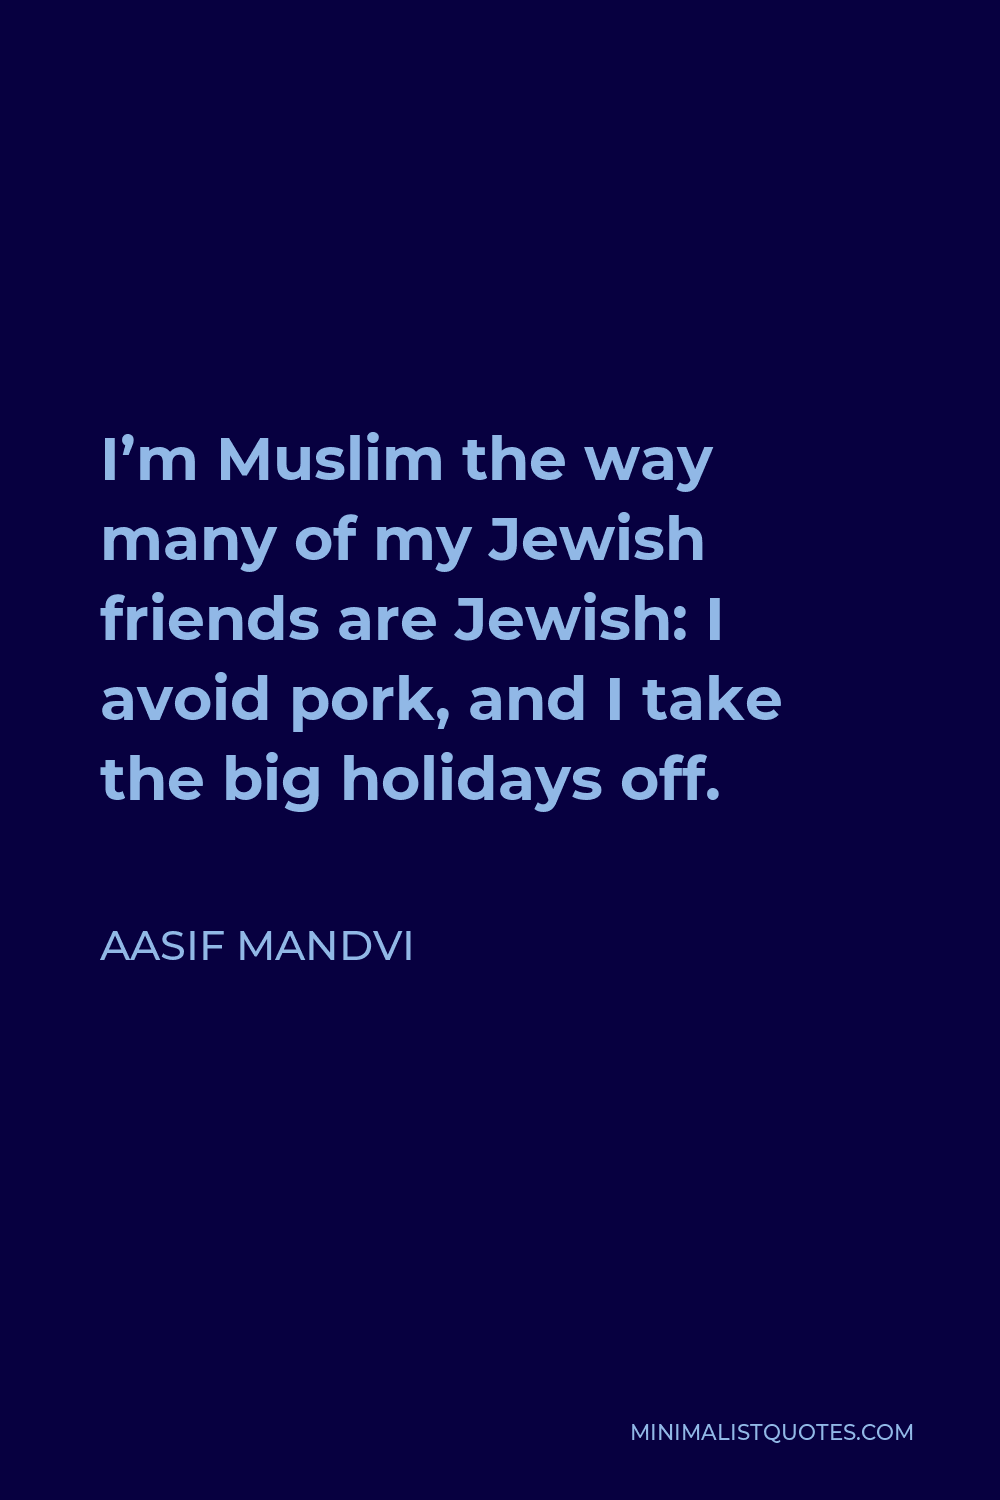 Aasif Mandvi Quote - I’m Muslim the way many of my Jewish friends are Jewish: I avoid pork, and I take the big holidays off.